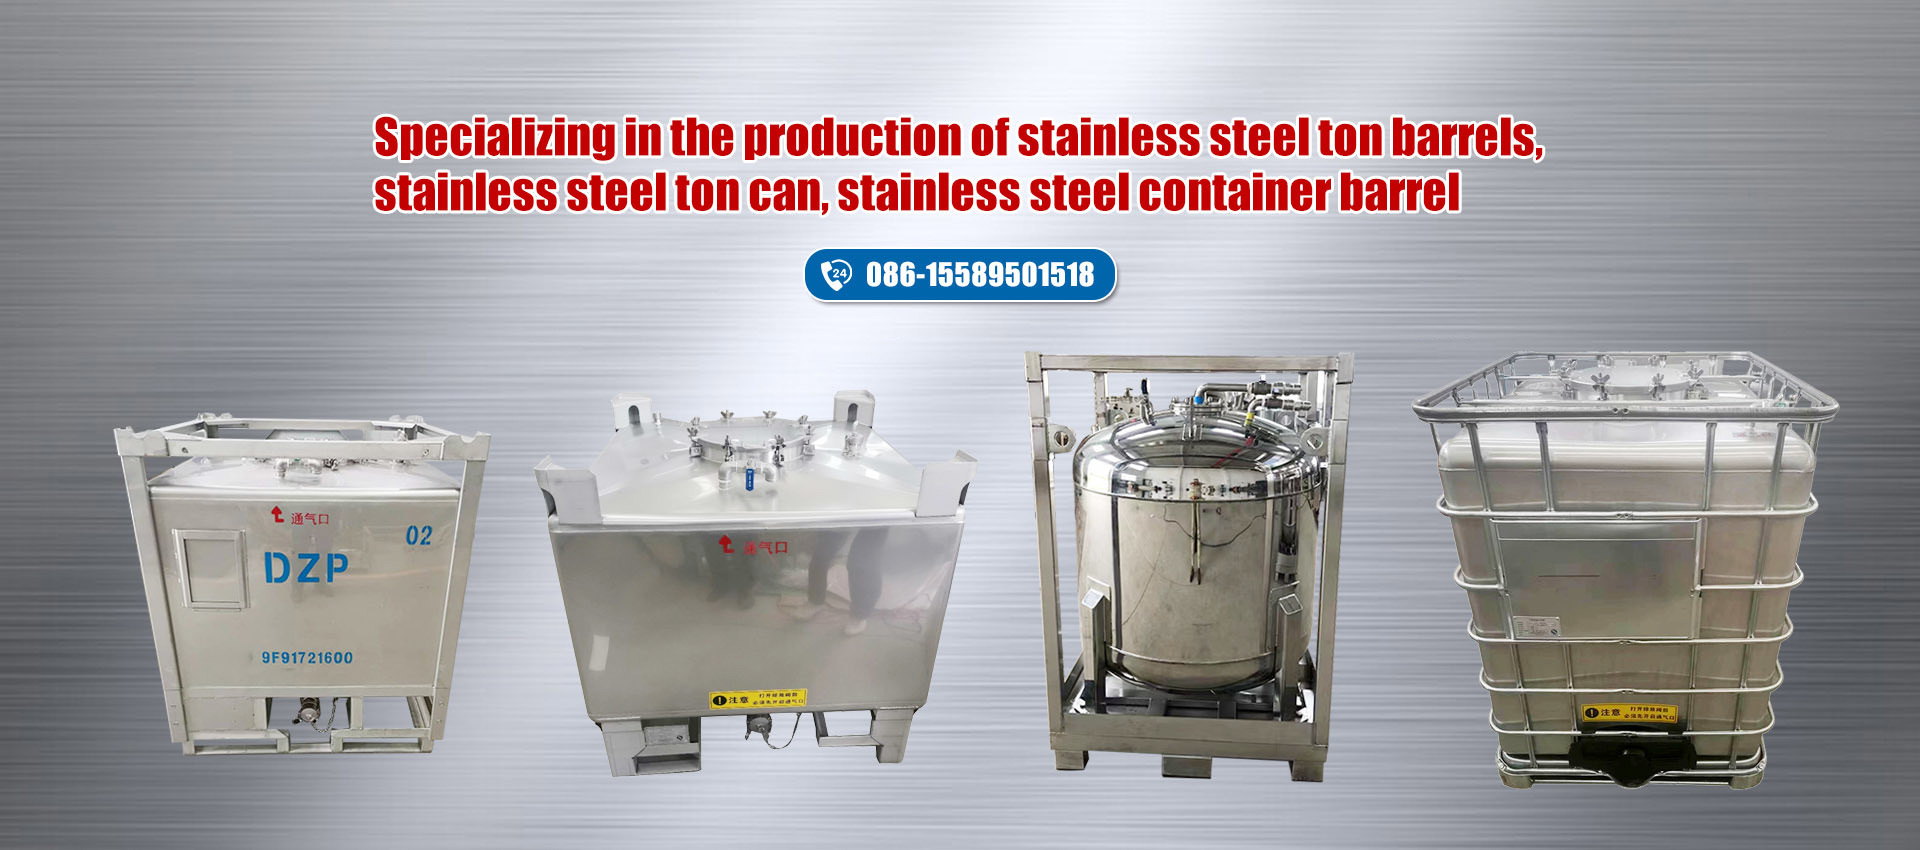 Haizheng metal products